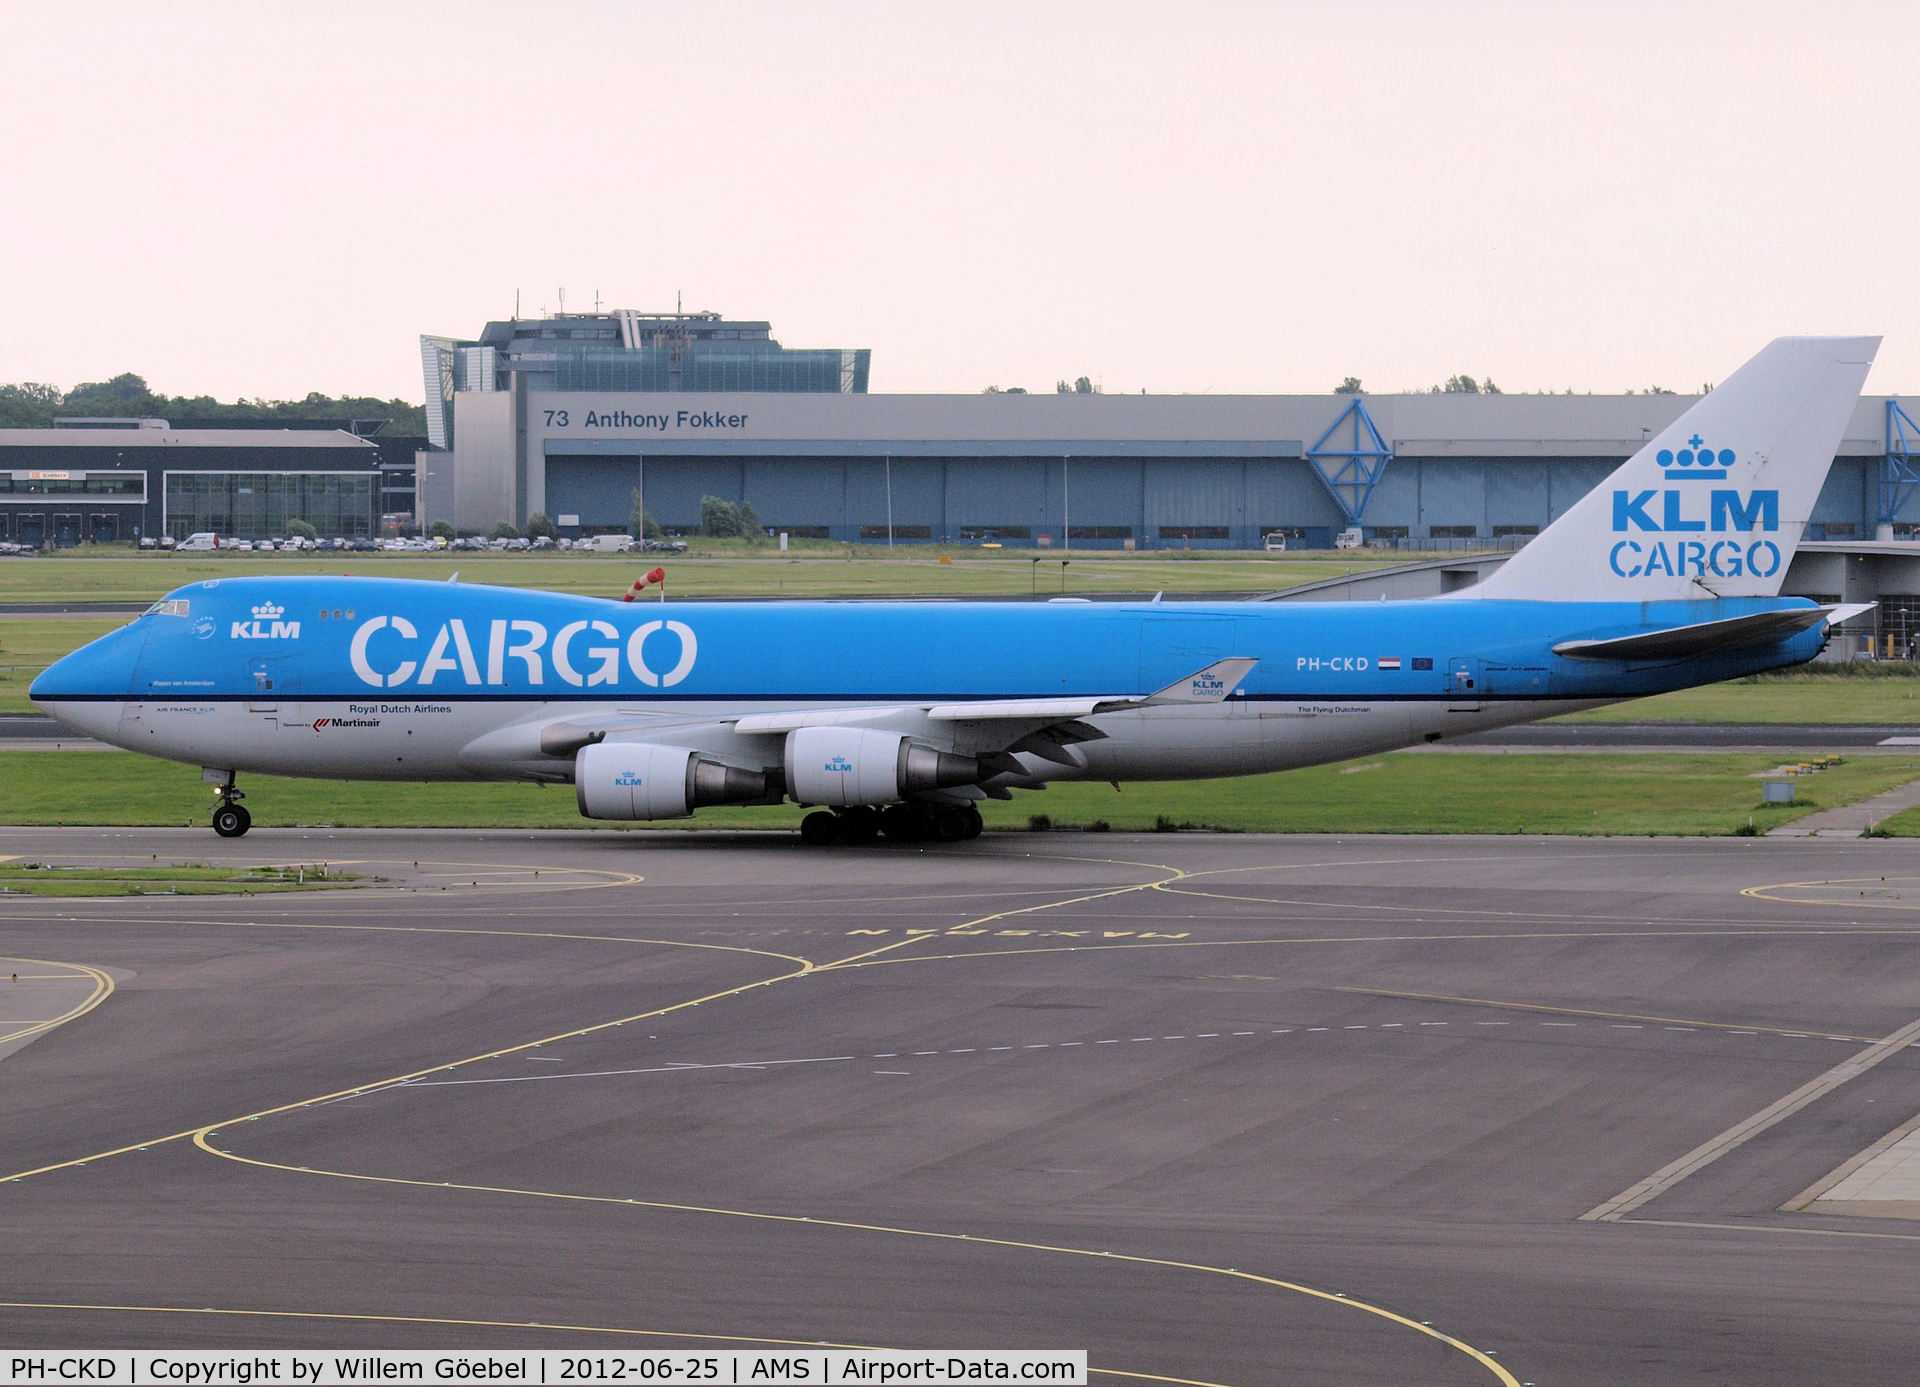 PH-CKD, 2008 Boeing 747-428F/ER/SCD C/N 35233, Taxi to runway 24 of Schiphol Airport